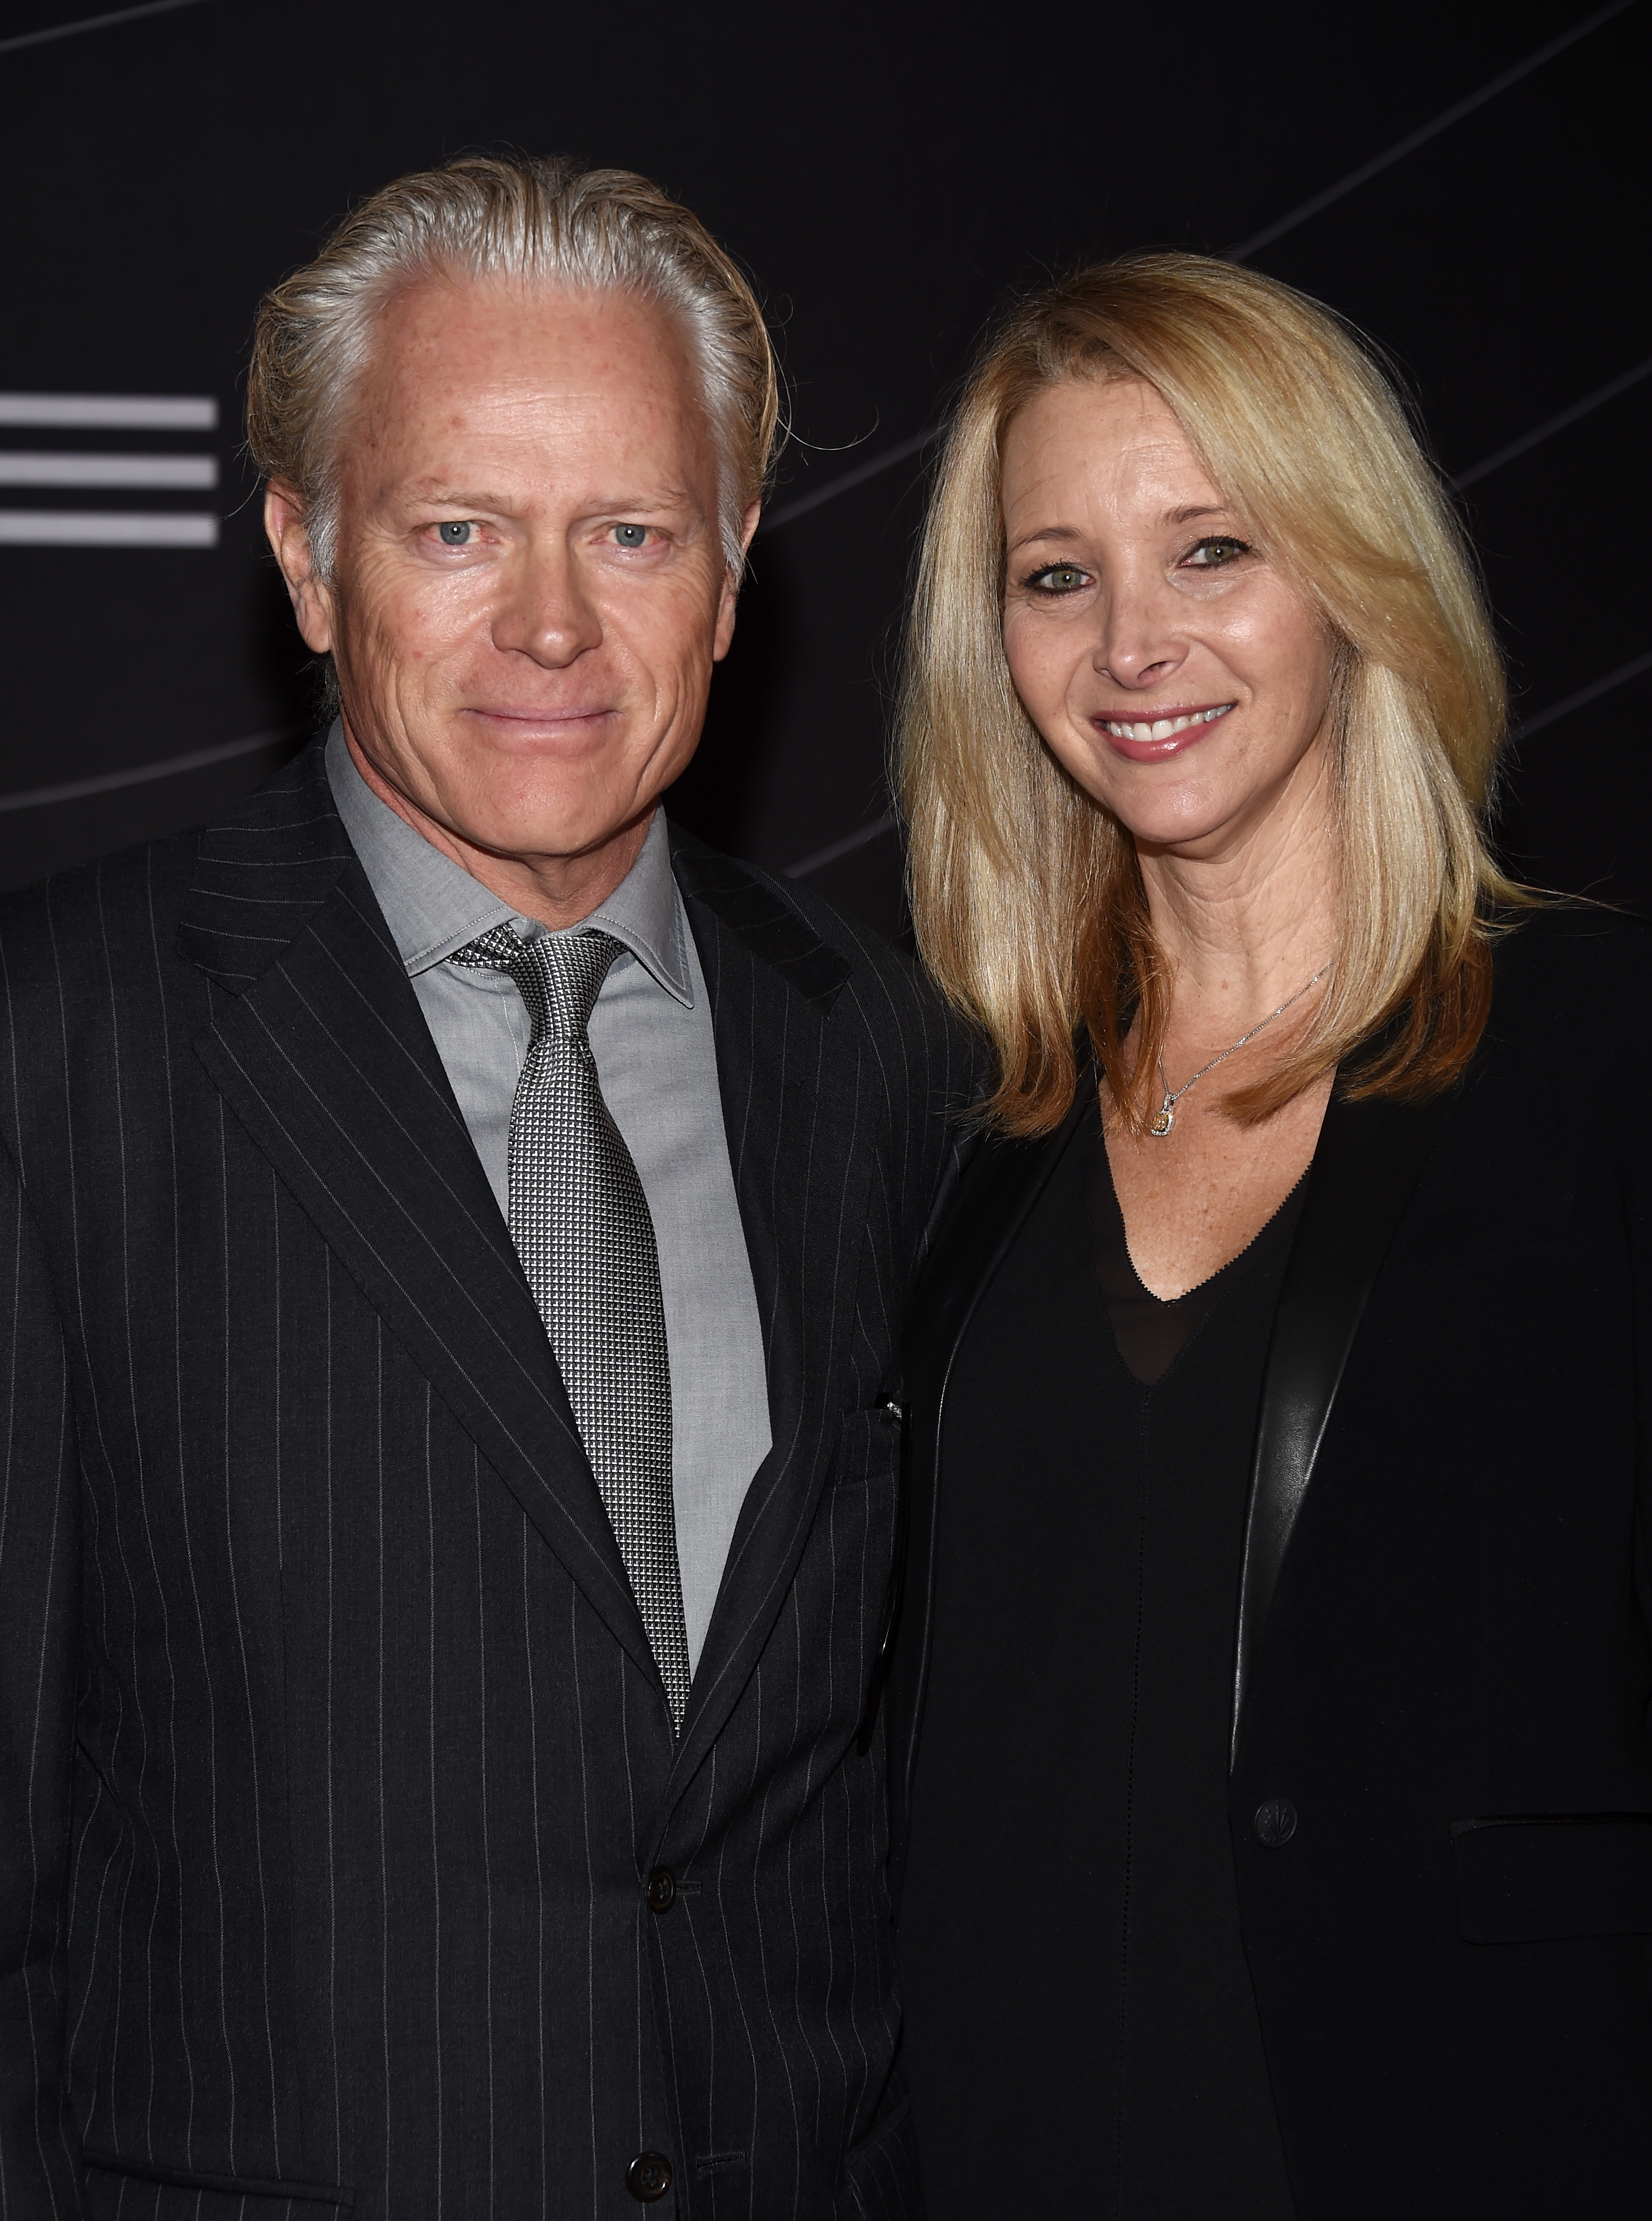 Lisa Kudrow and her husband Michel Stern at the Petersen Automotive Museum grand re-opening in Los Angeles, California on December 5, 2015 | Source: Getty Images